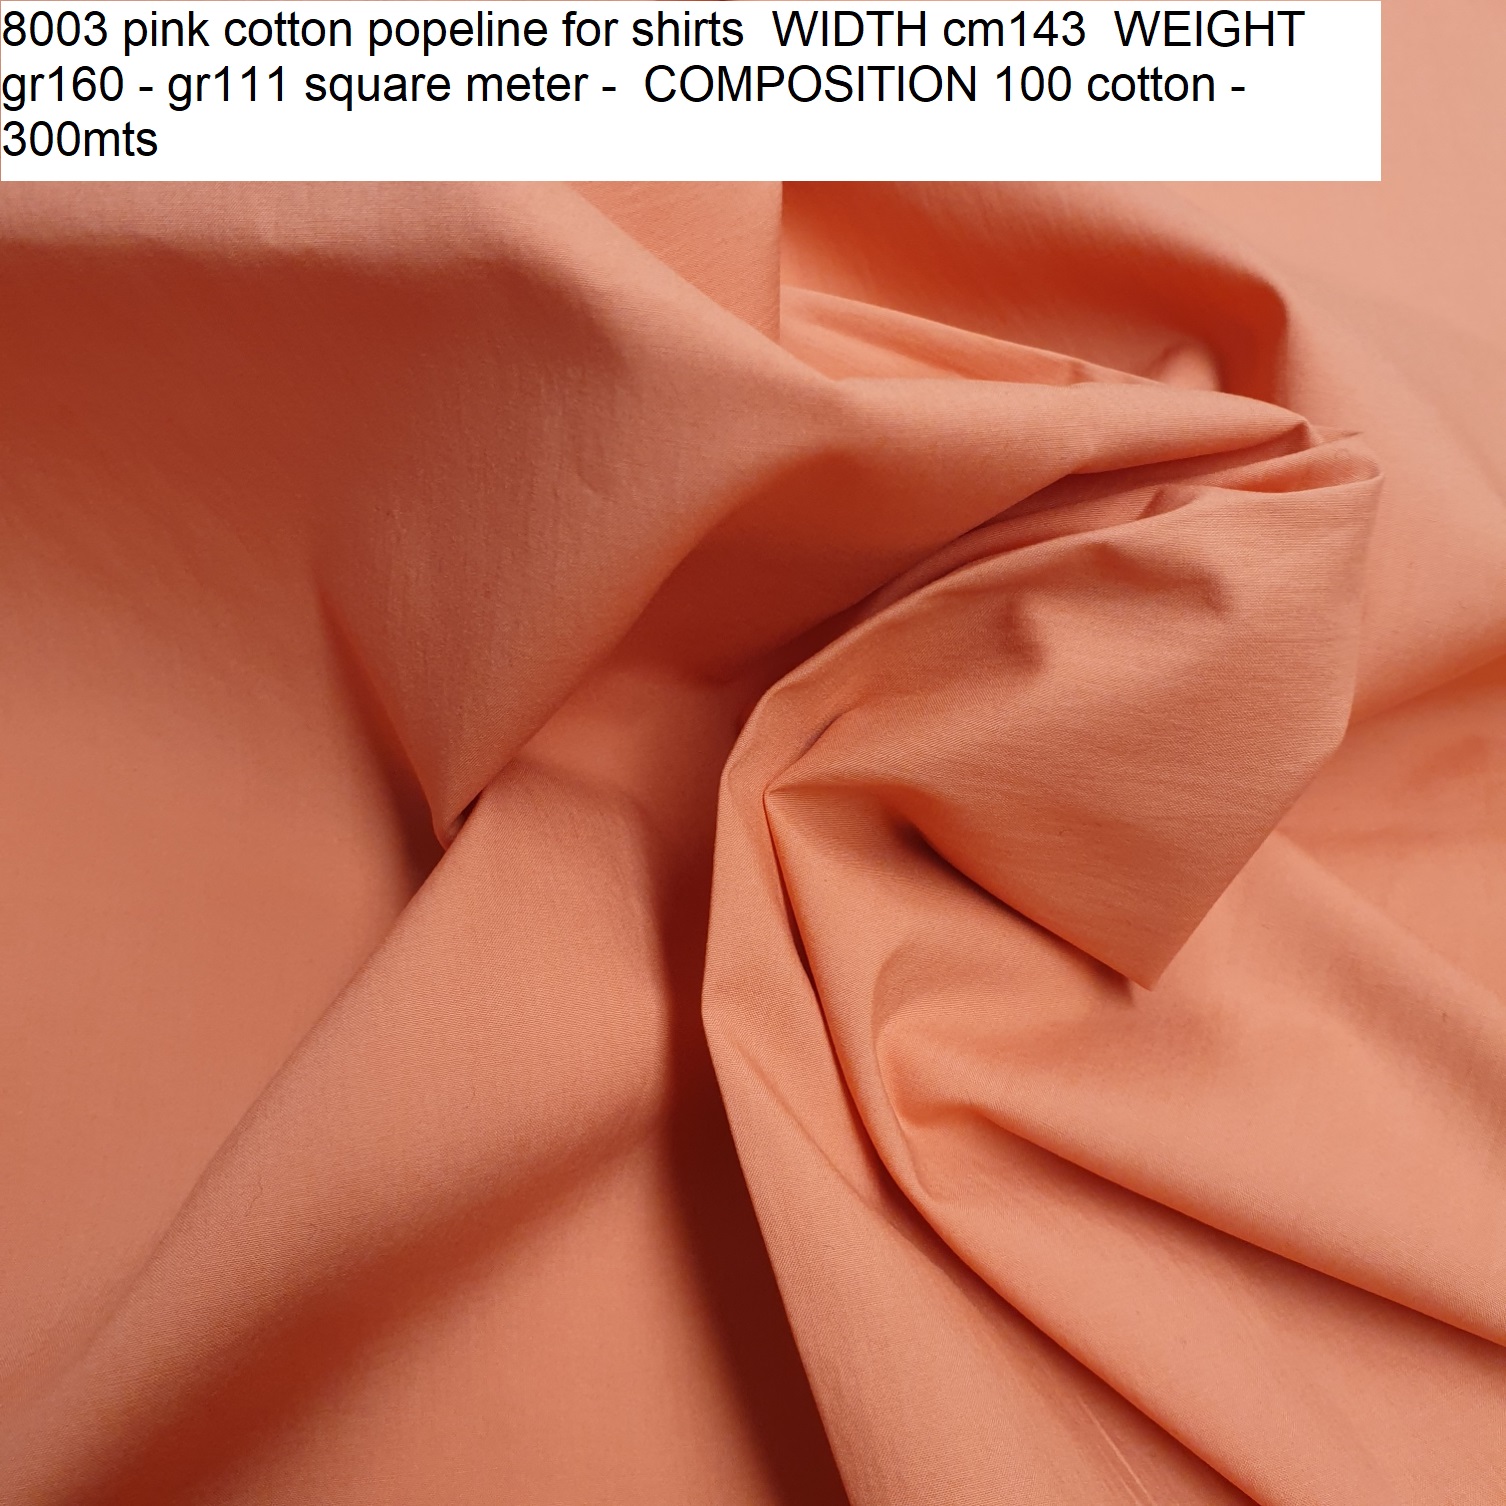 8003 pink cotton popeline for shirts WIDTH cm143 WEIGHT gr160 - gr111 square meter - COMPOSITION 100 cotton - 300mts